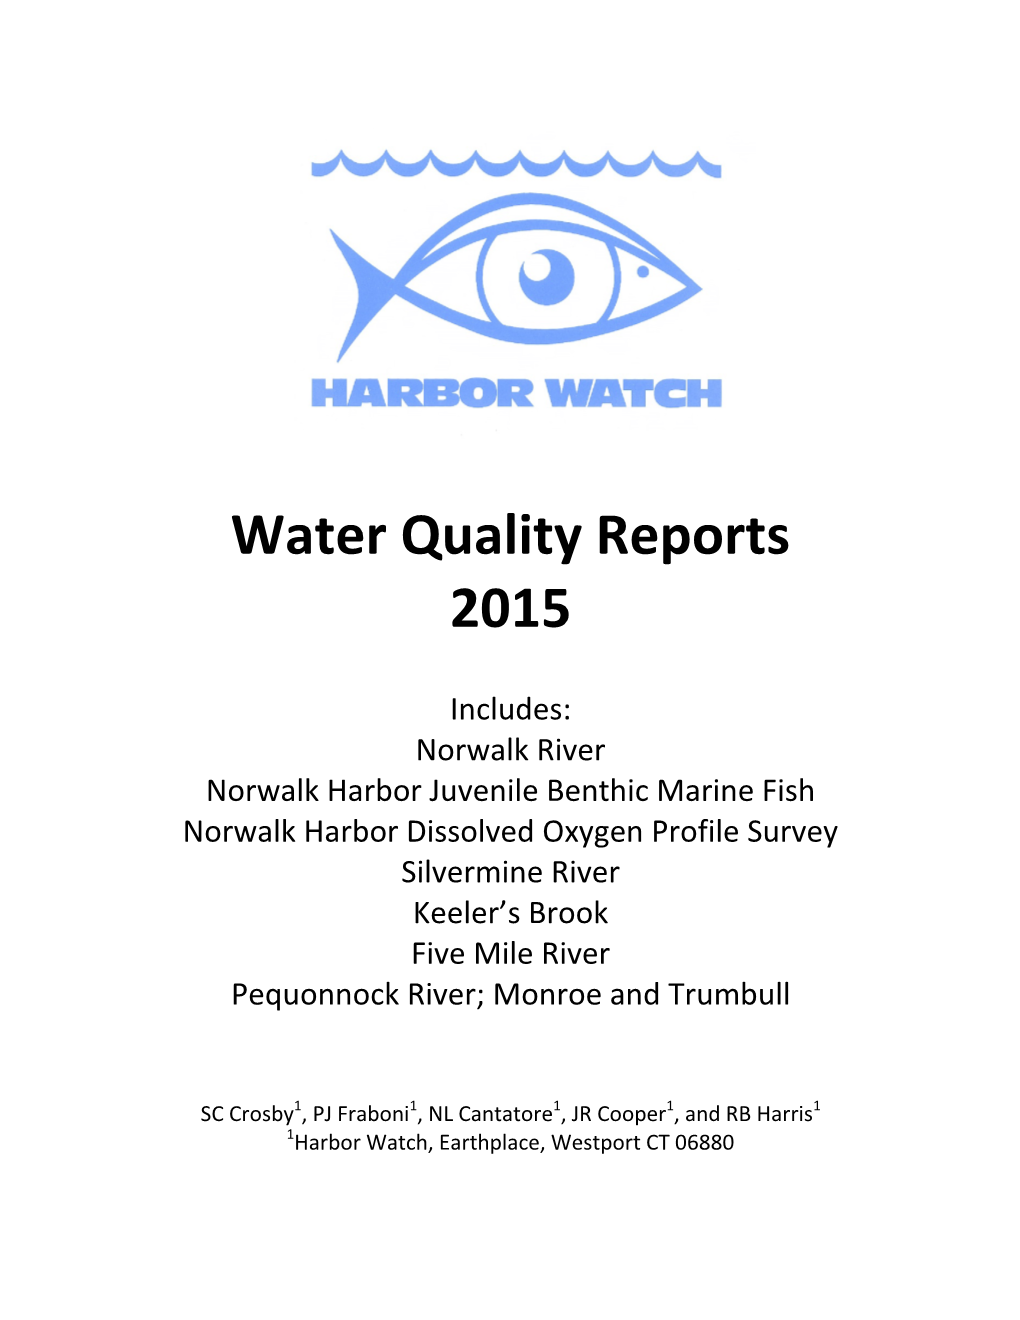 Water Quality Reports 2015